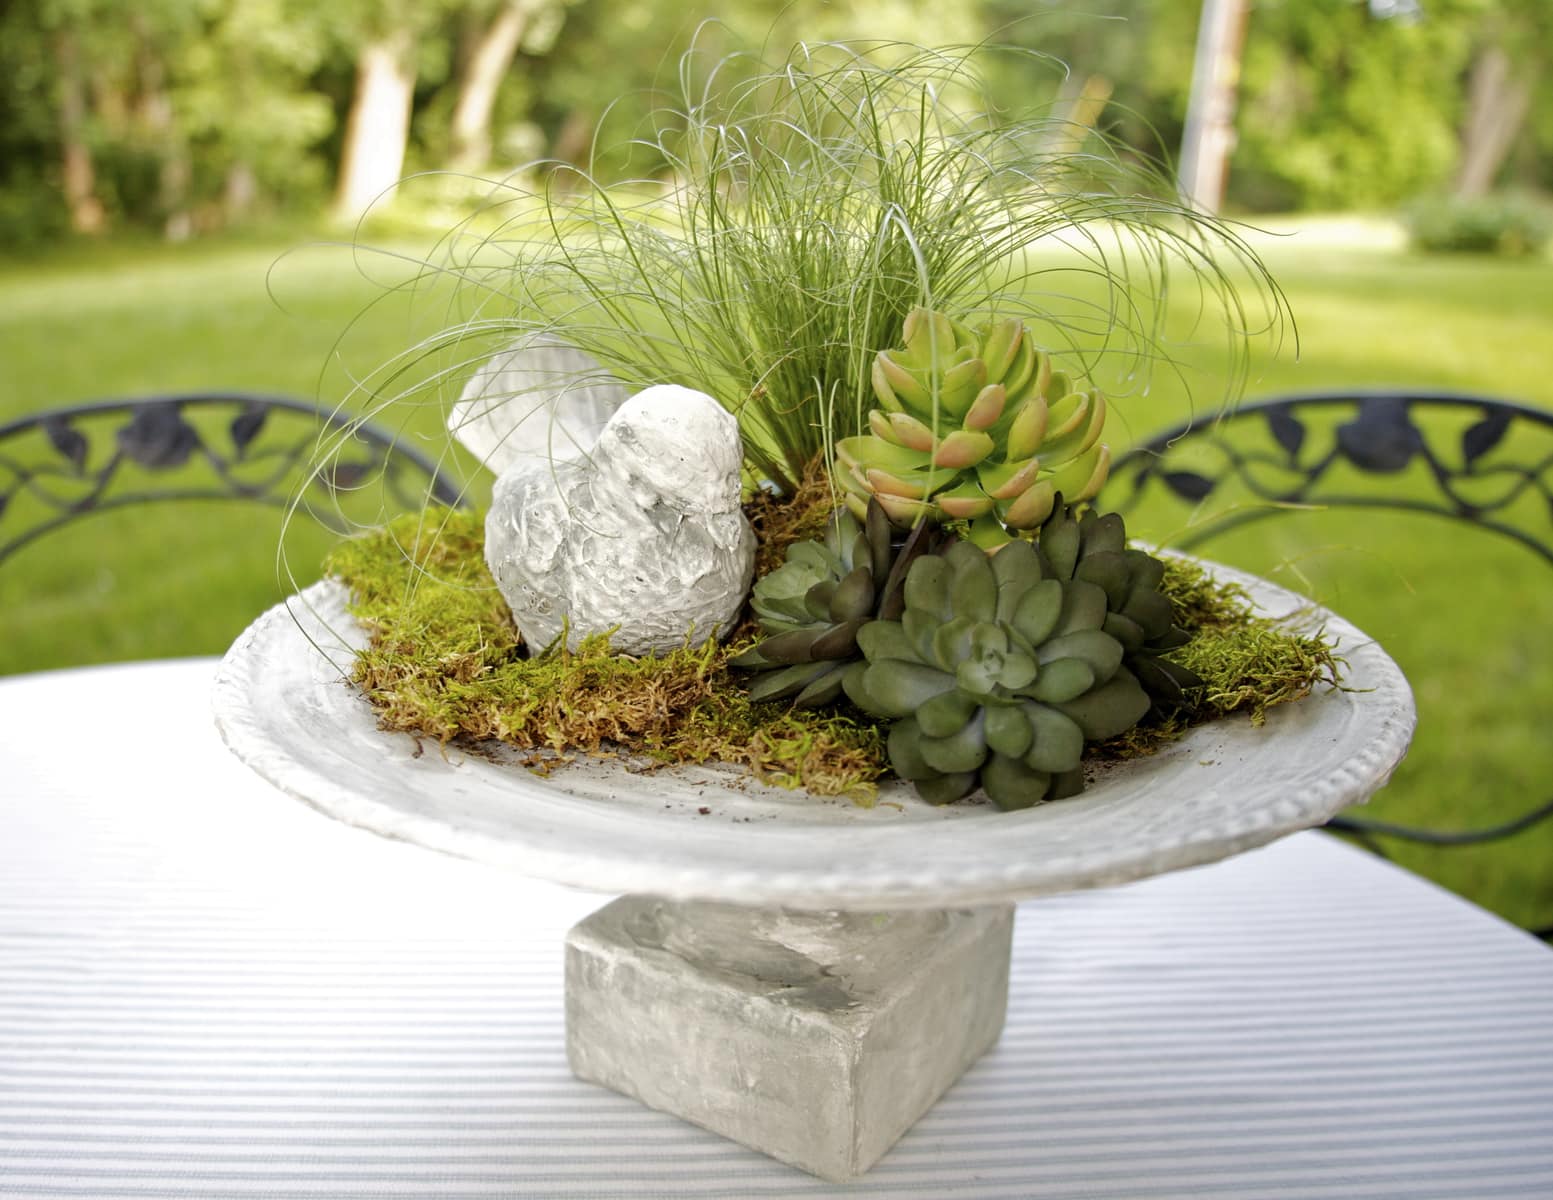 Wouldn’t You Love Birdbath Centerpieces For Your Next Party?